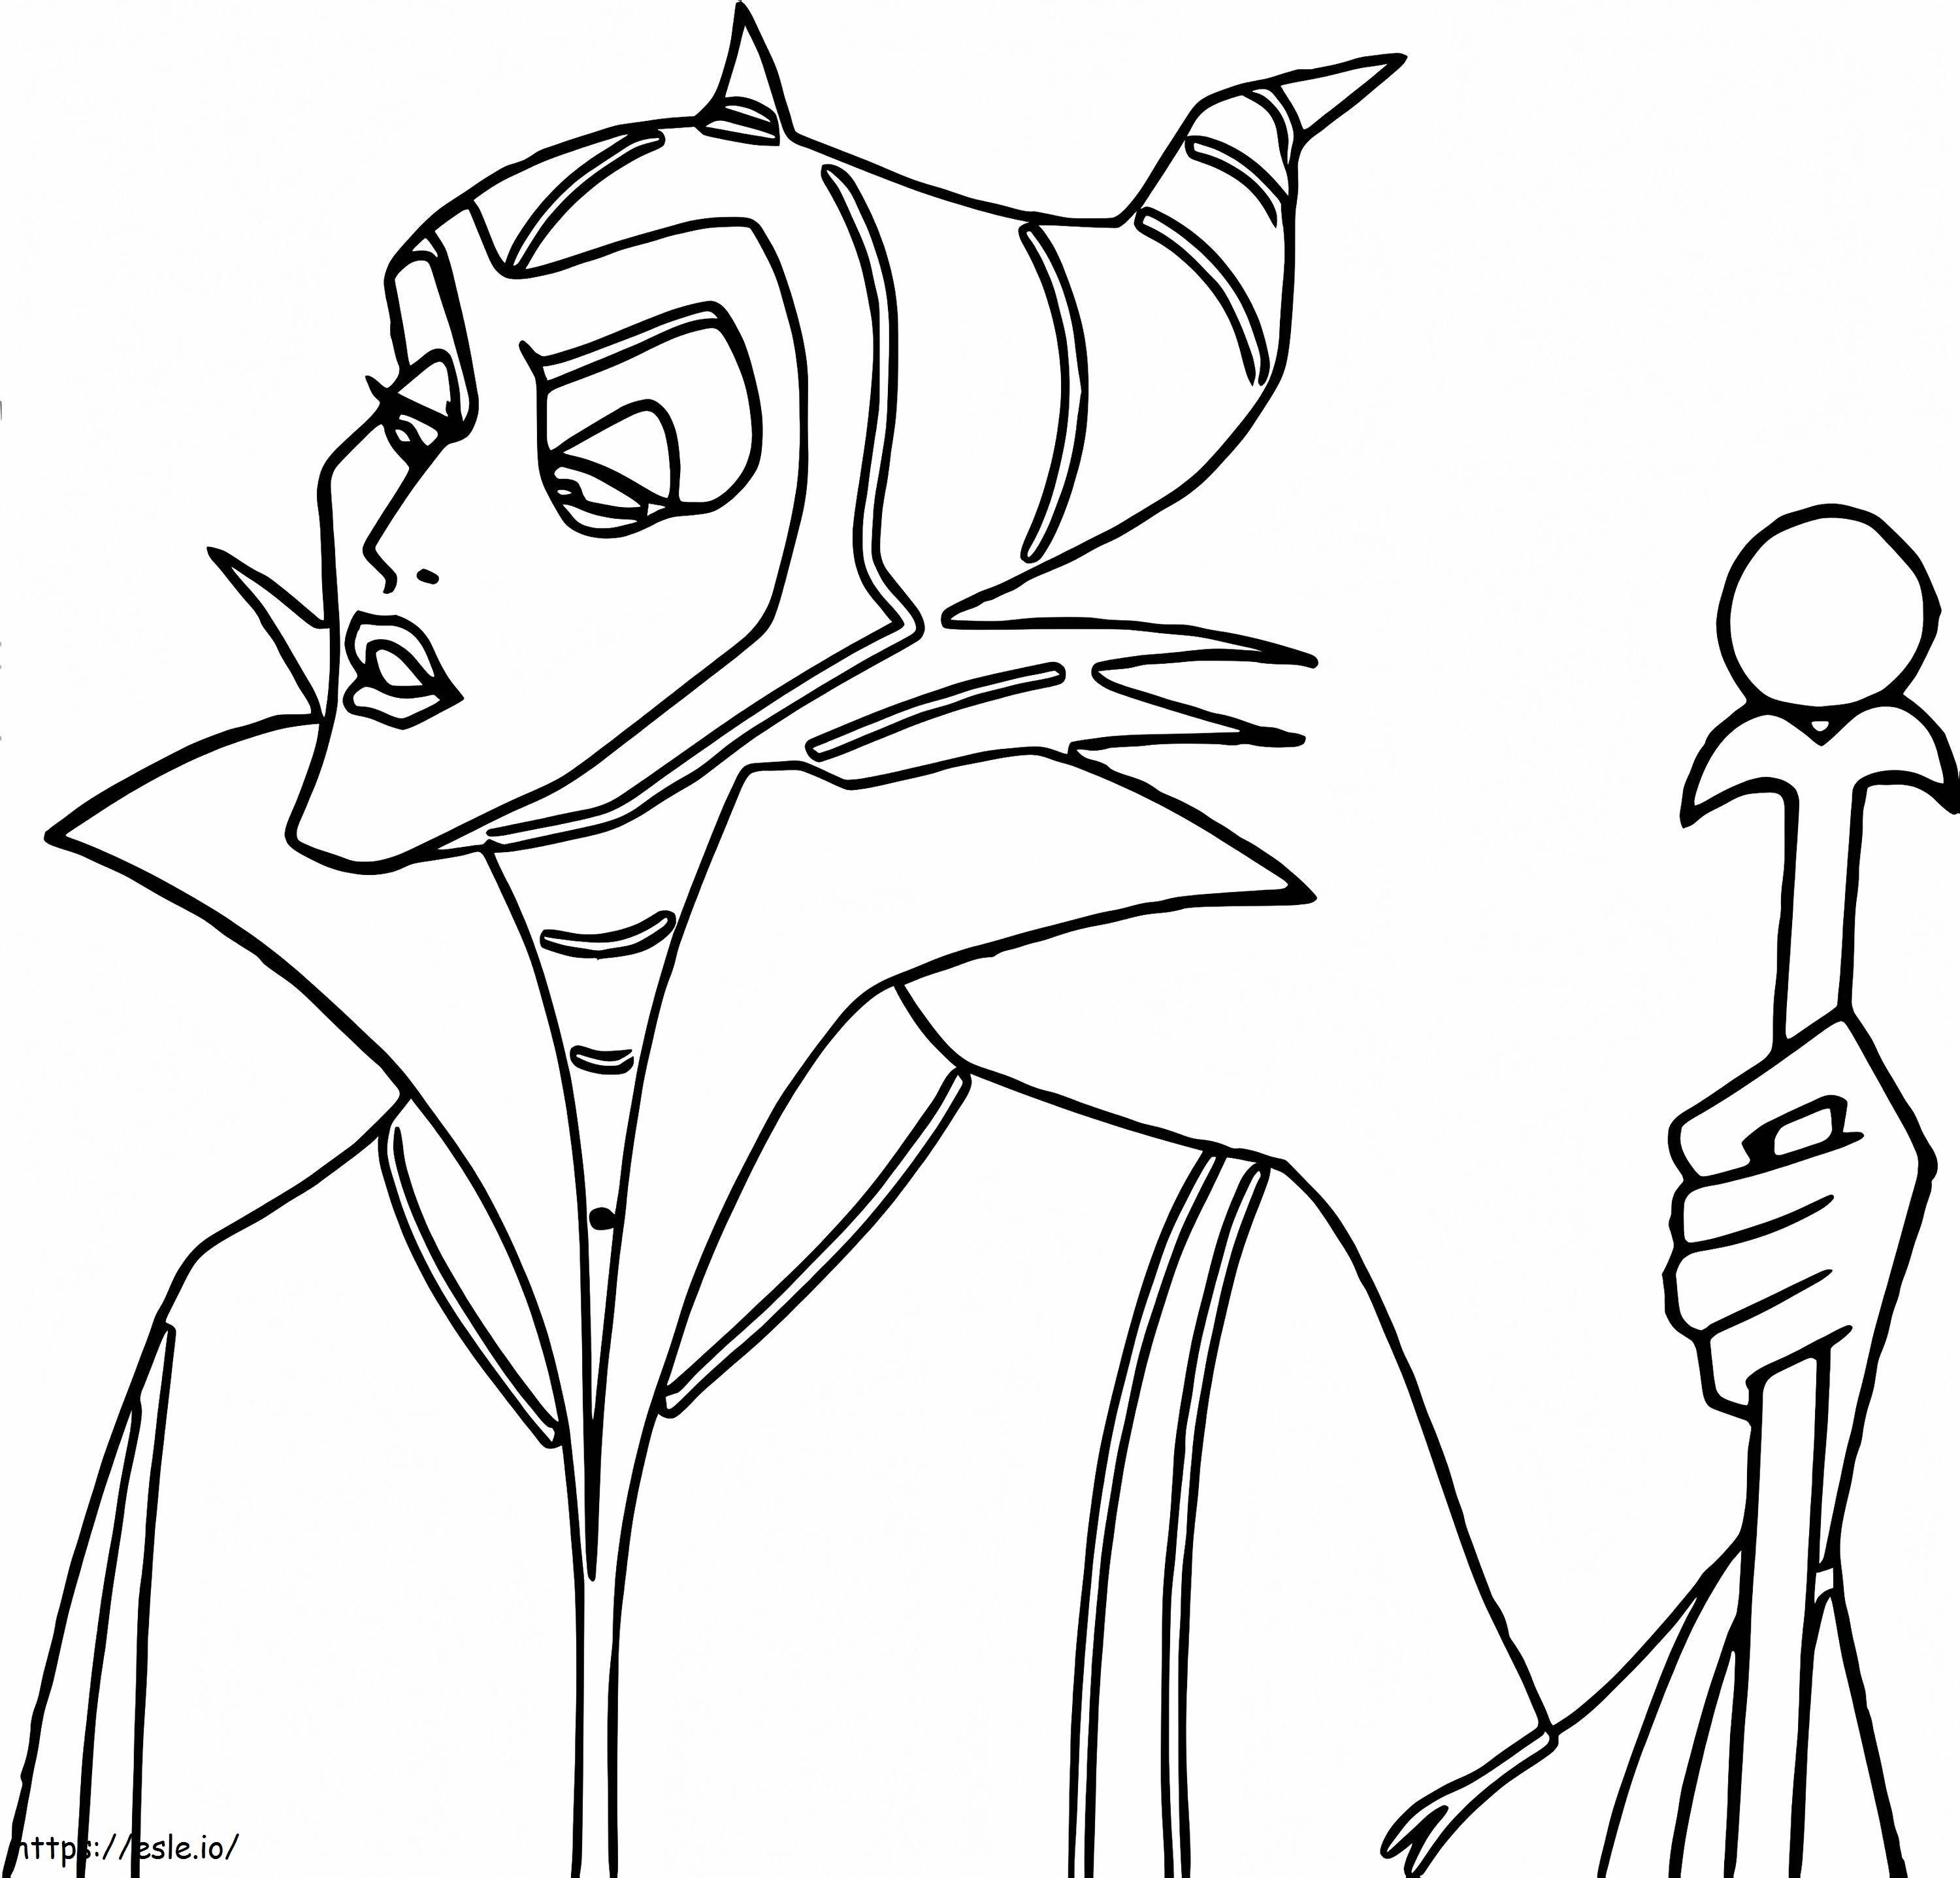 Maleficent 1 coloring page